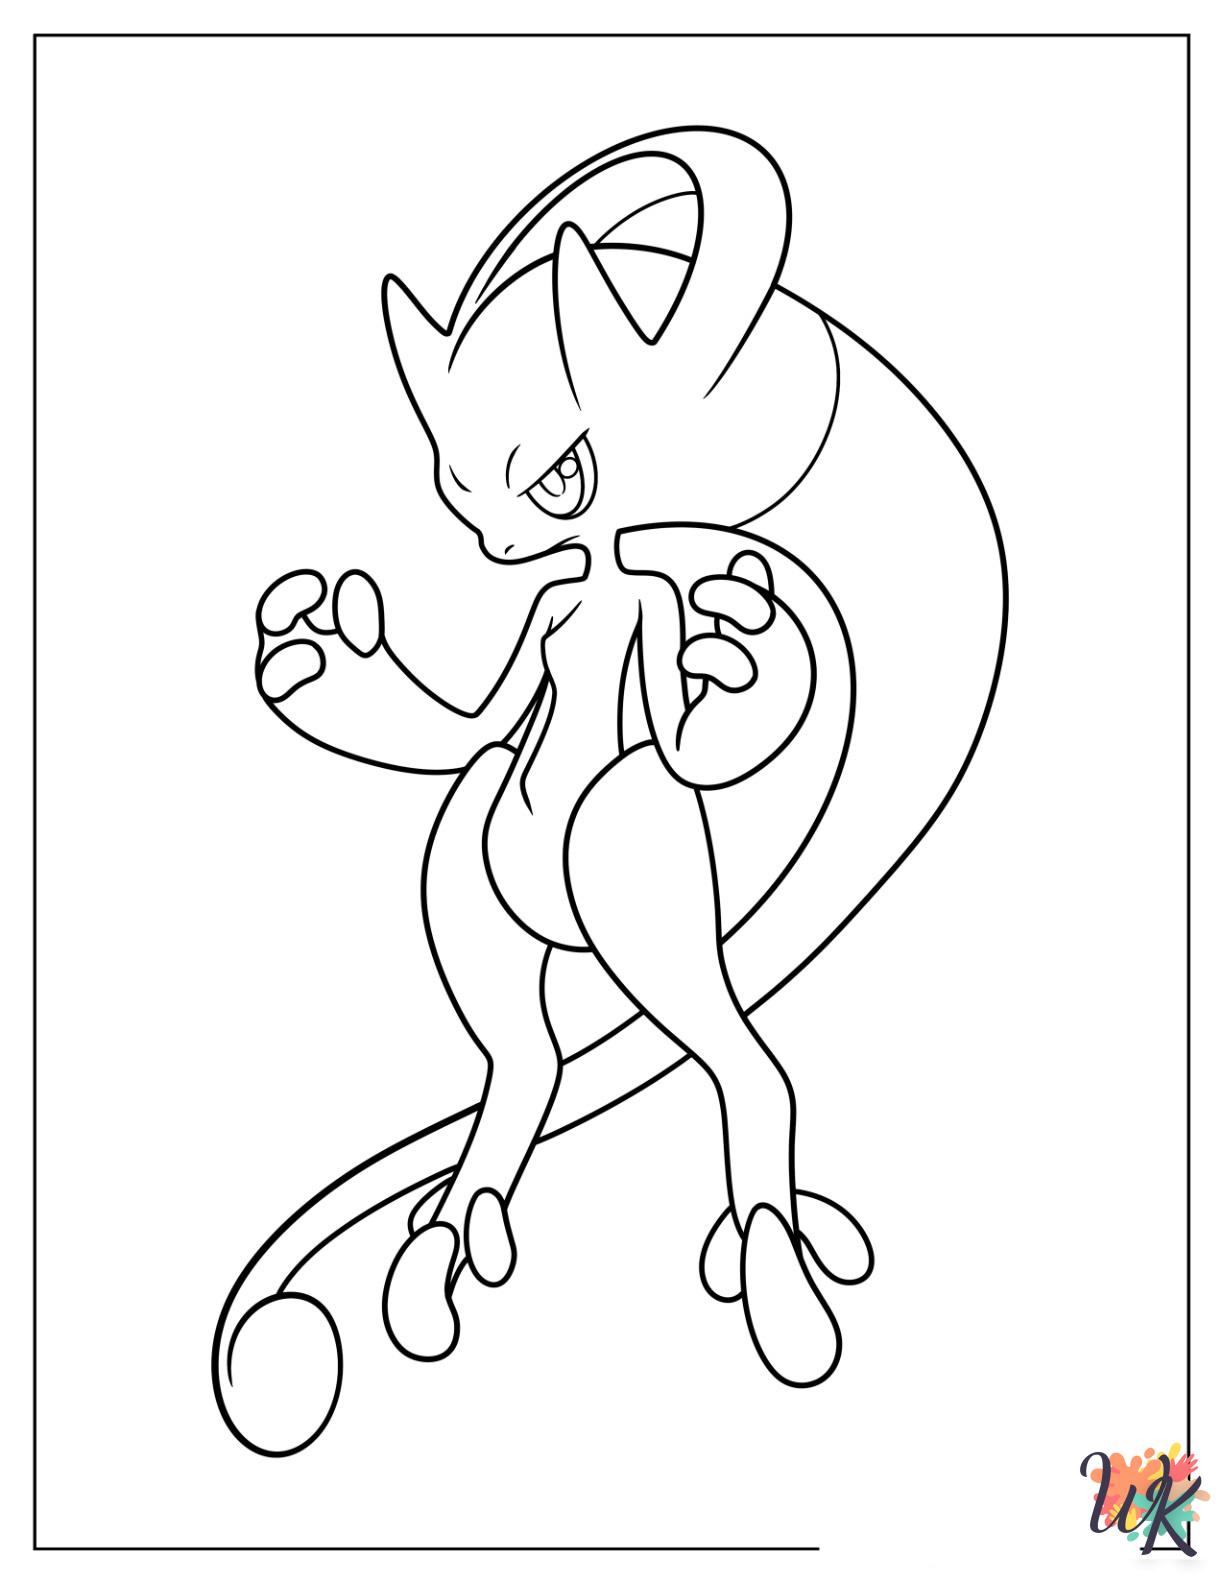 Mewtwo coloring pages easy